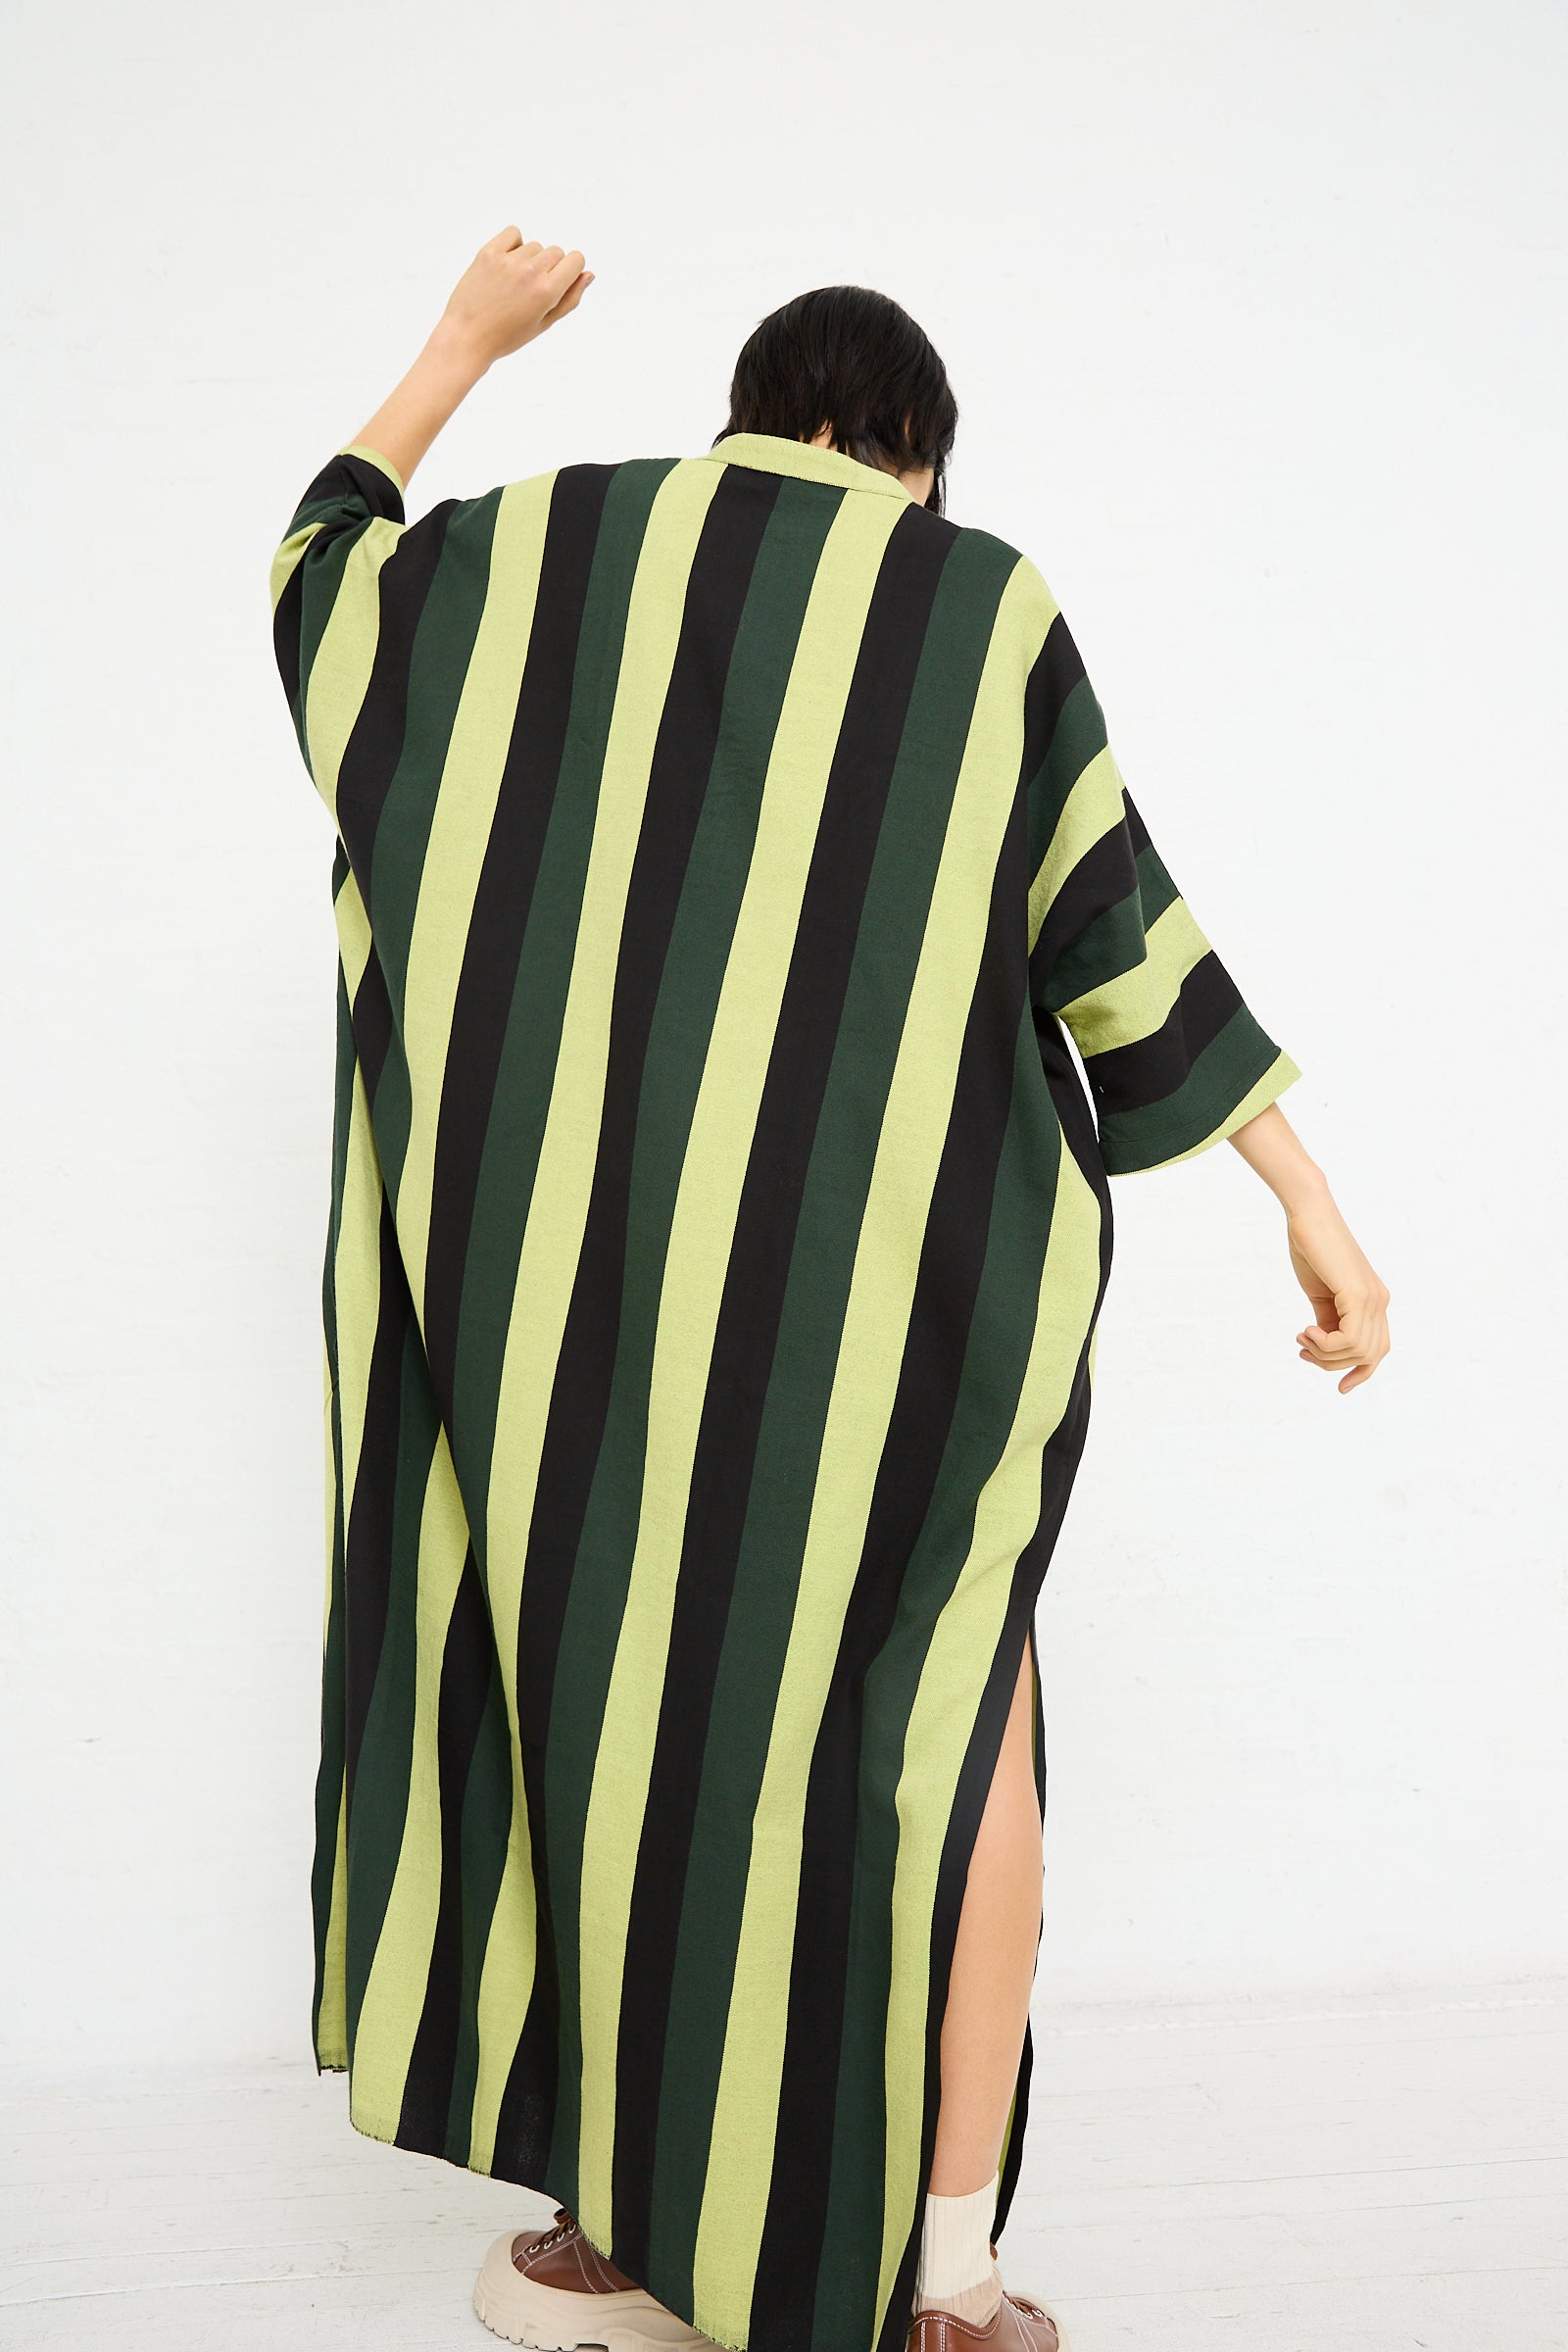 A person in a Nero Collar Caftan in Green Stripe from Marrakshi Life with an oversized fit posing with one arm raised.